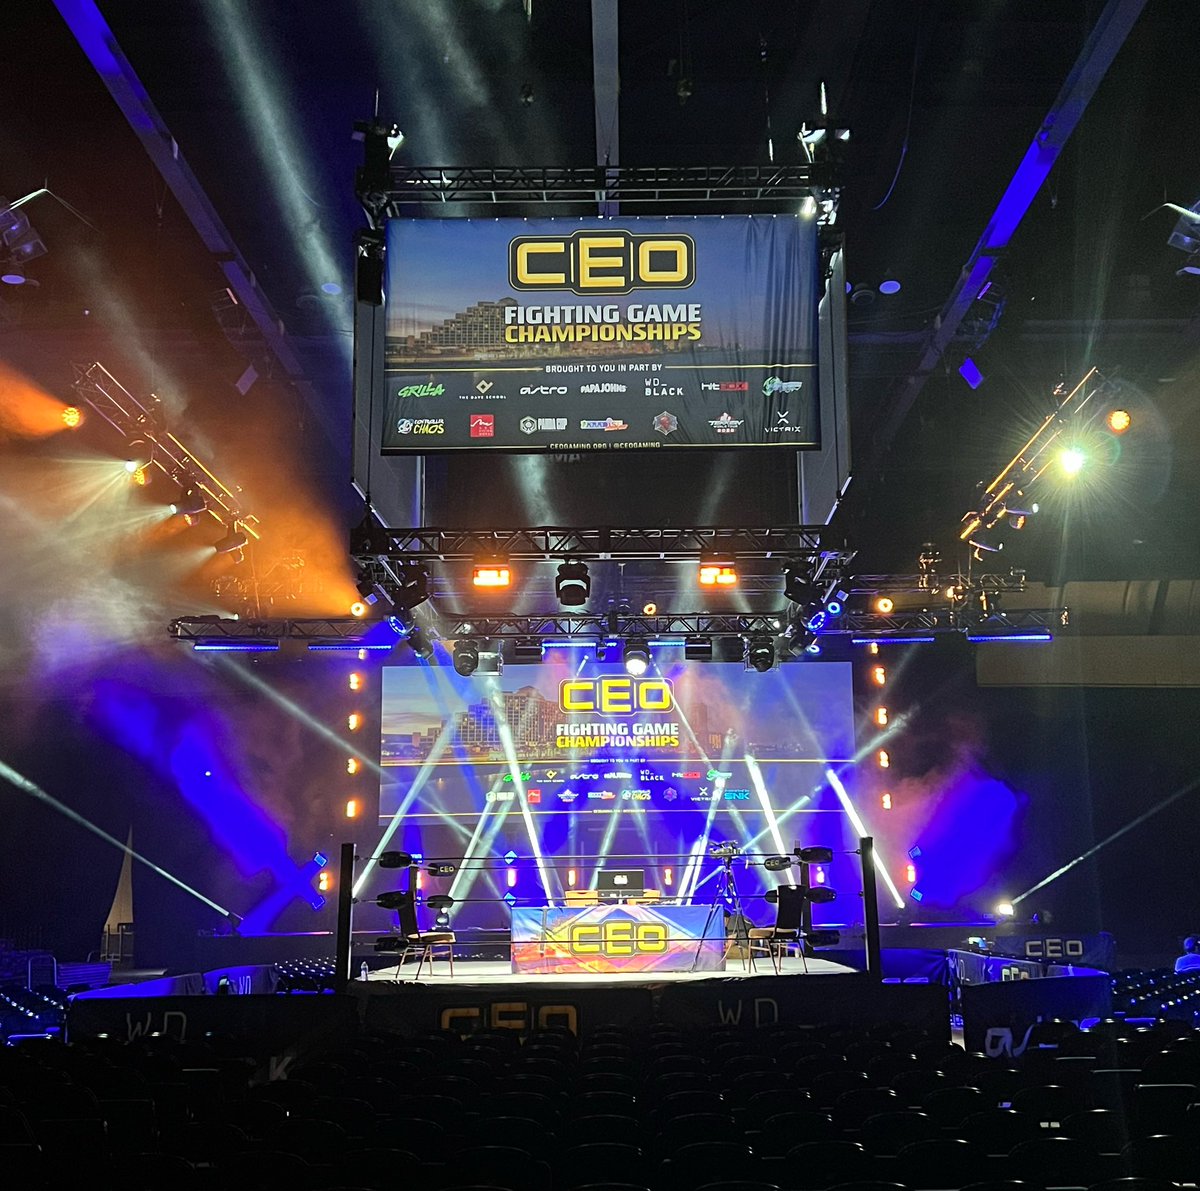 #CEO2022 is officially underway! Tune in this weekend on Twitch, or if you’re here in person look out for our partner @wd_black doing giveaways all event long!